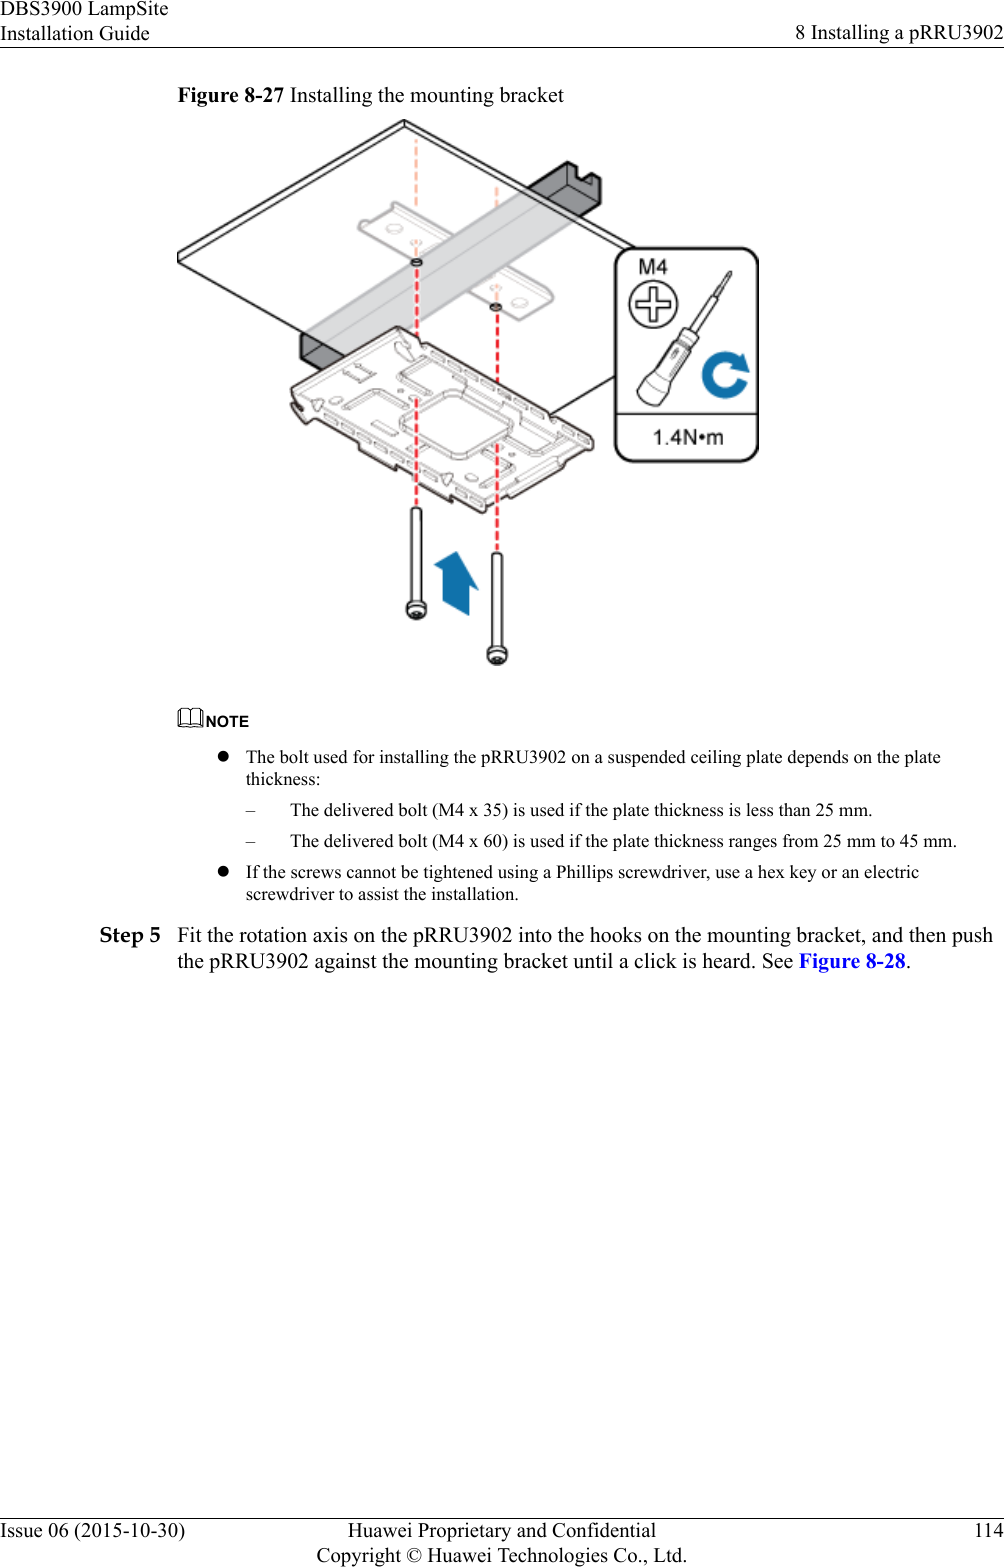 Figure 8-27 Installing the mounting bracketNOTElThe bolt used for installing the pRRU3902 on a suspended ceiling plate depends on the platethickness:– The delivered bolt (M4 x 35) is used if the plate thickness is less than 25 mm.– The delivered bolt (M4 x 60) is used if the plate thickness ranges from 25 mm to 45 mm.lIf the screws cannot be tightened using a Phillips screwdriver, use a hex key or an electricscrewdriver to assist the installation.Step 5 Fit the rotation axis on the pRRU3902 into the hooks on the mounting bracket, and then pushthe pRRU3902 against the mounting bracket until a click is heard. See Figure 8-28.DBS3900 LampSiteInstallation Guide 8 Installing a pRRU3902Issue 06 (2015-10-30) Huawei Proprietary and ConfidentialCopyright © Huawei Technologies Co., Ltd.114